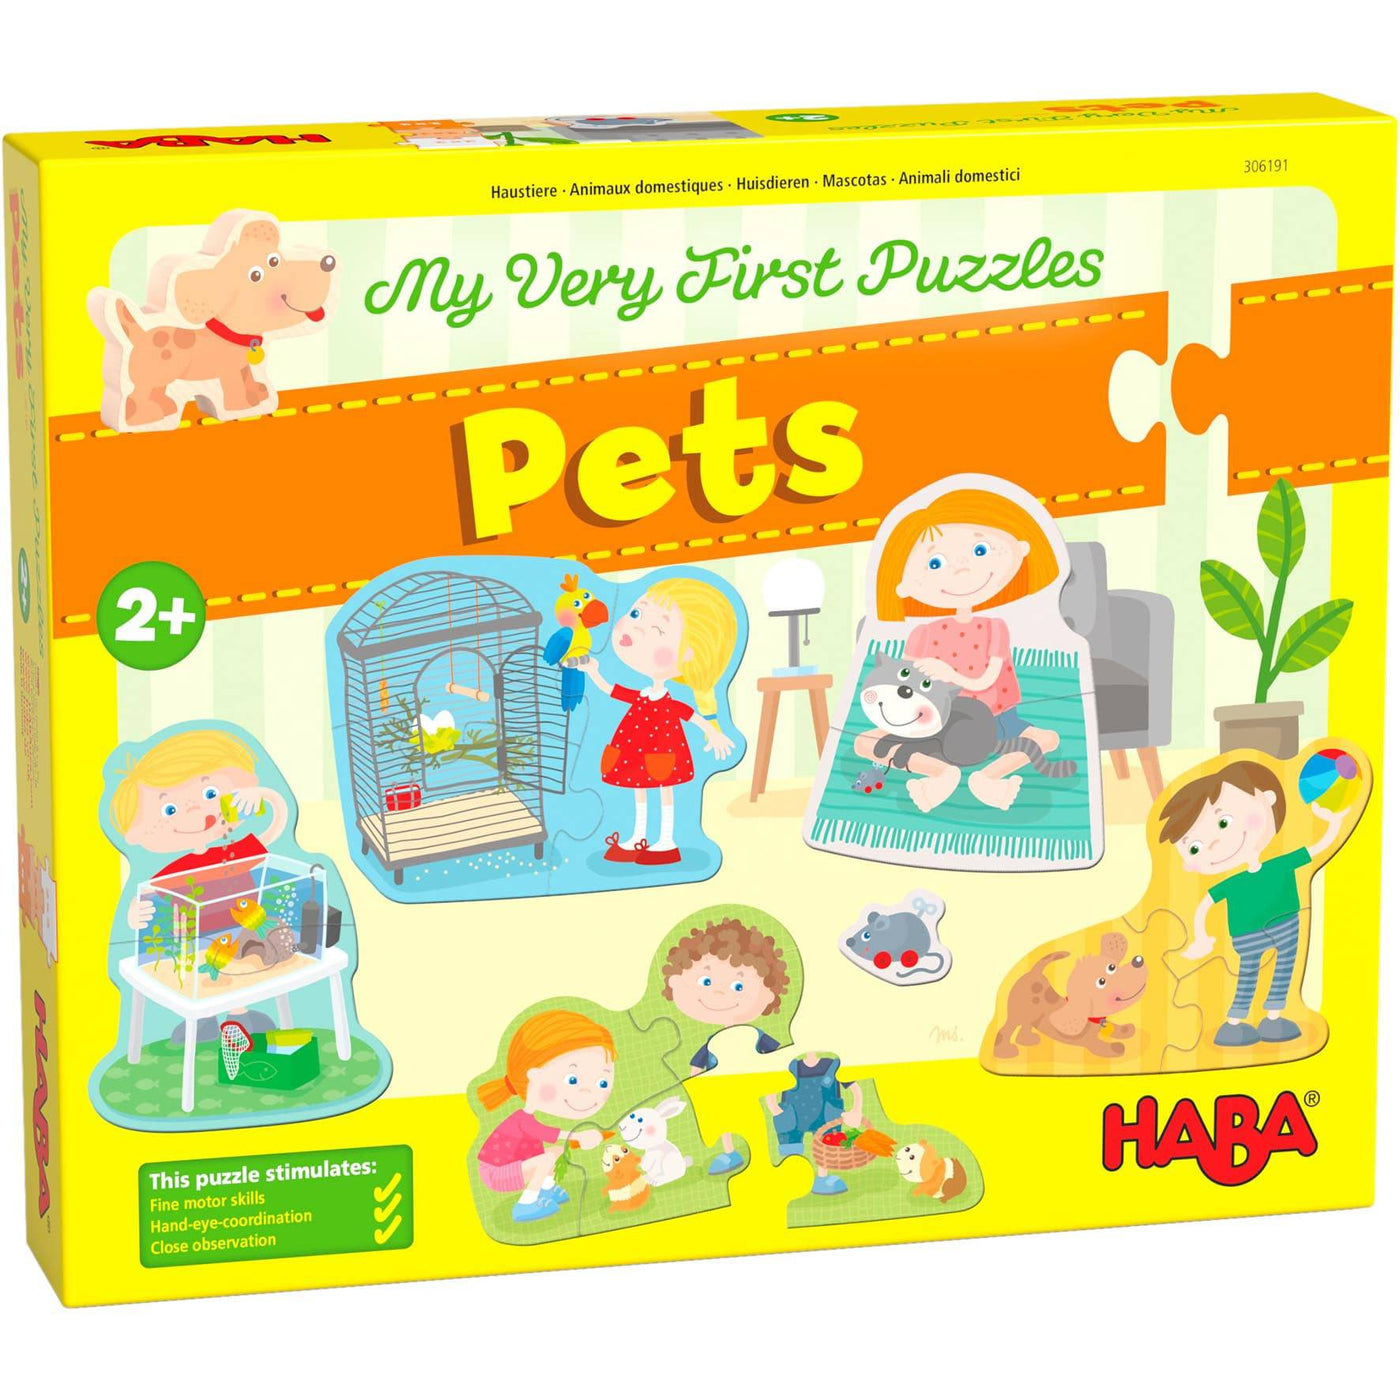 My Very First Puzzles - Pets - HABA USA